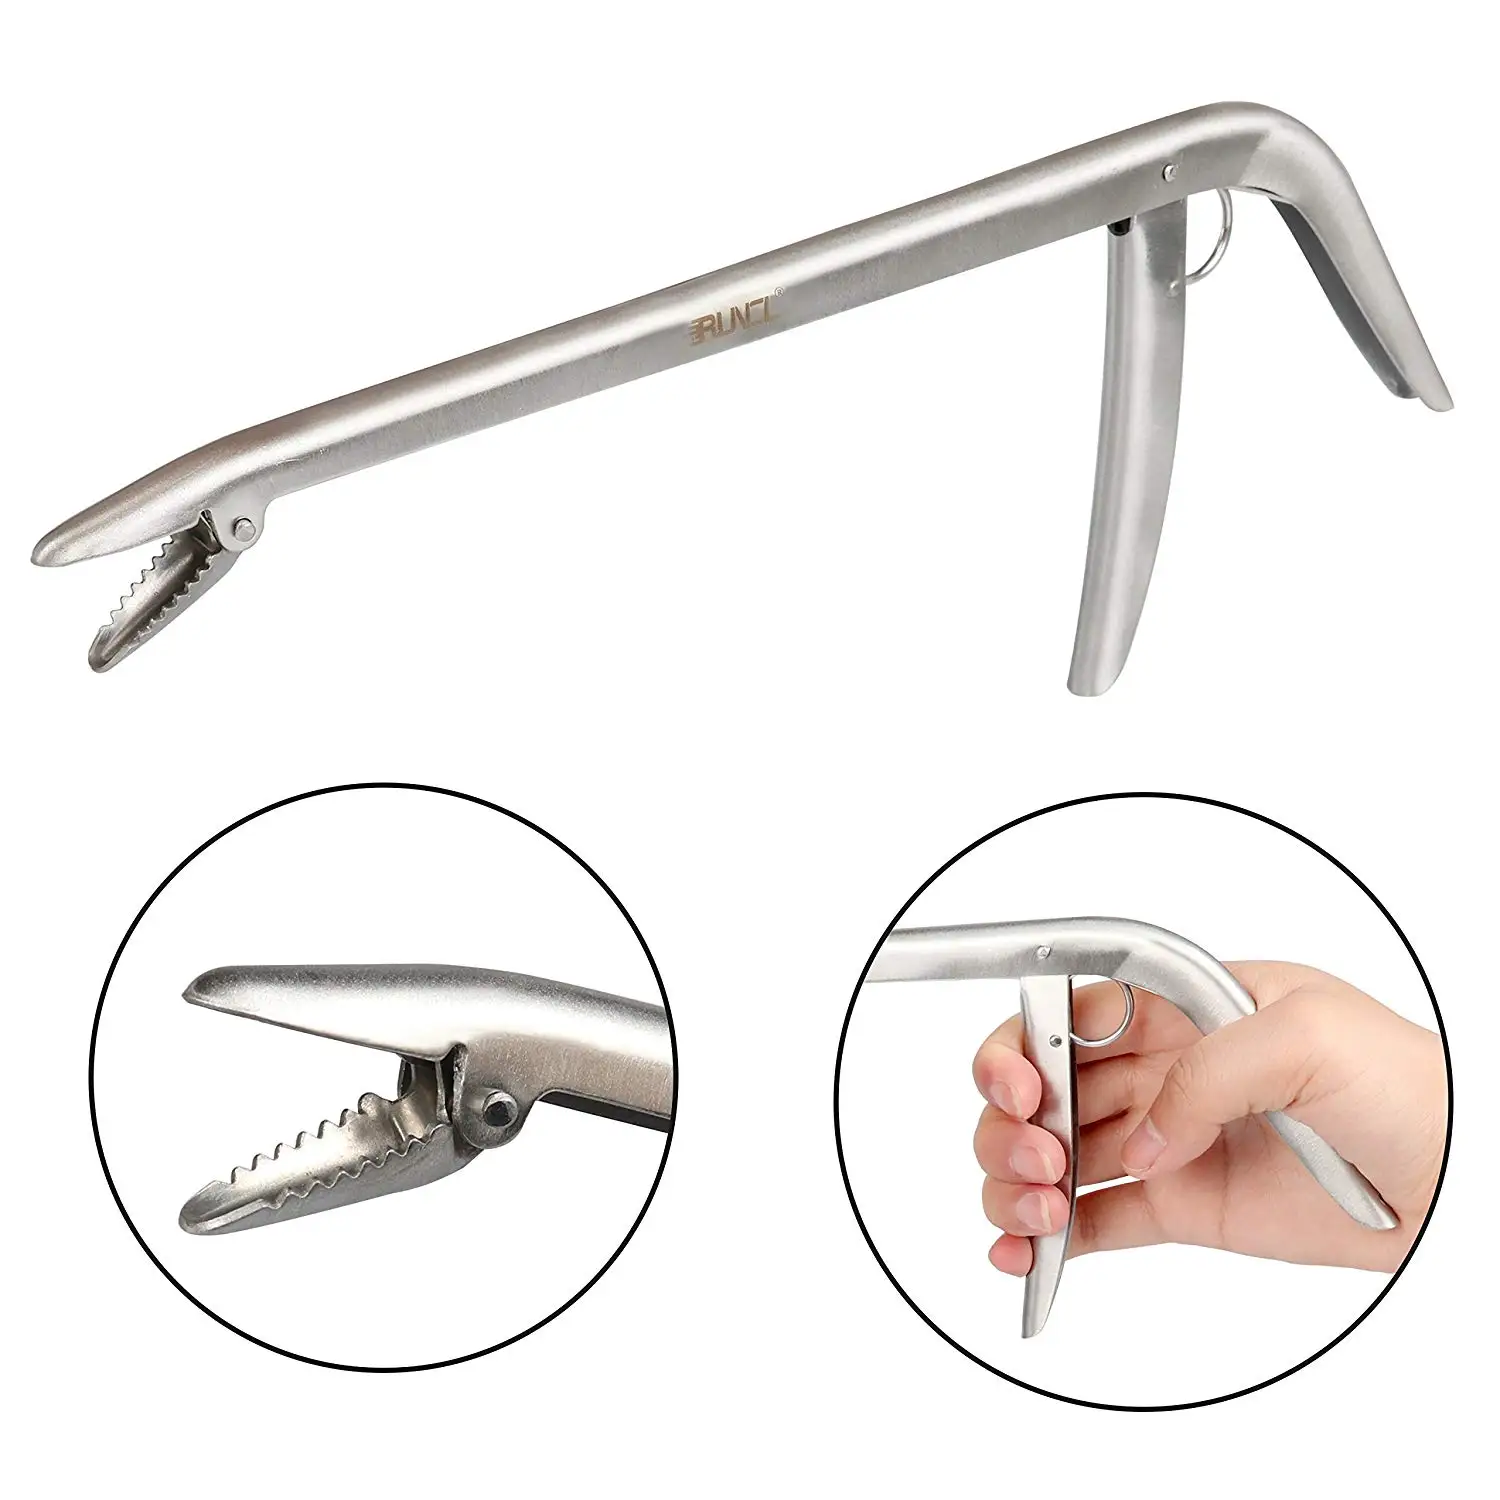 Cheap Fish Hook Remover Tool, find Fish Hook Remover Tool